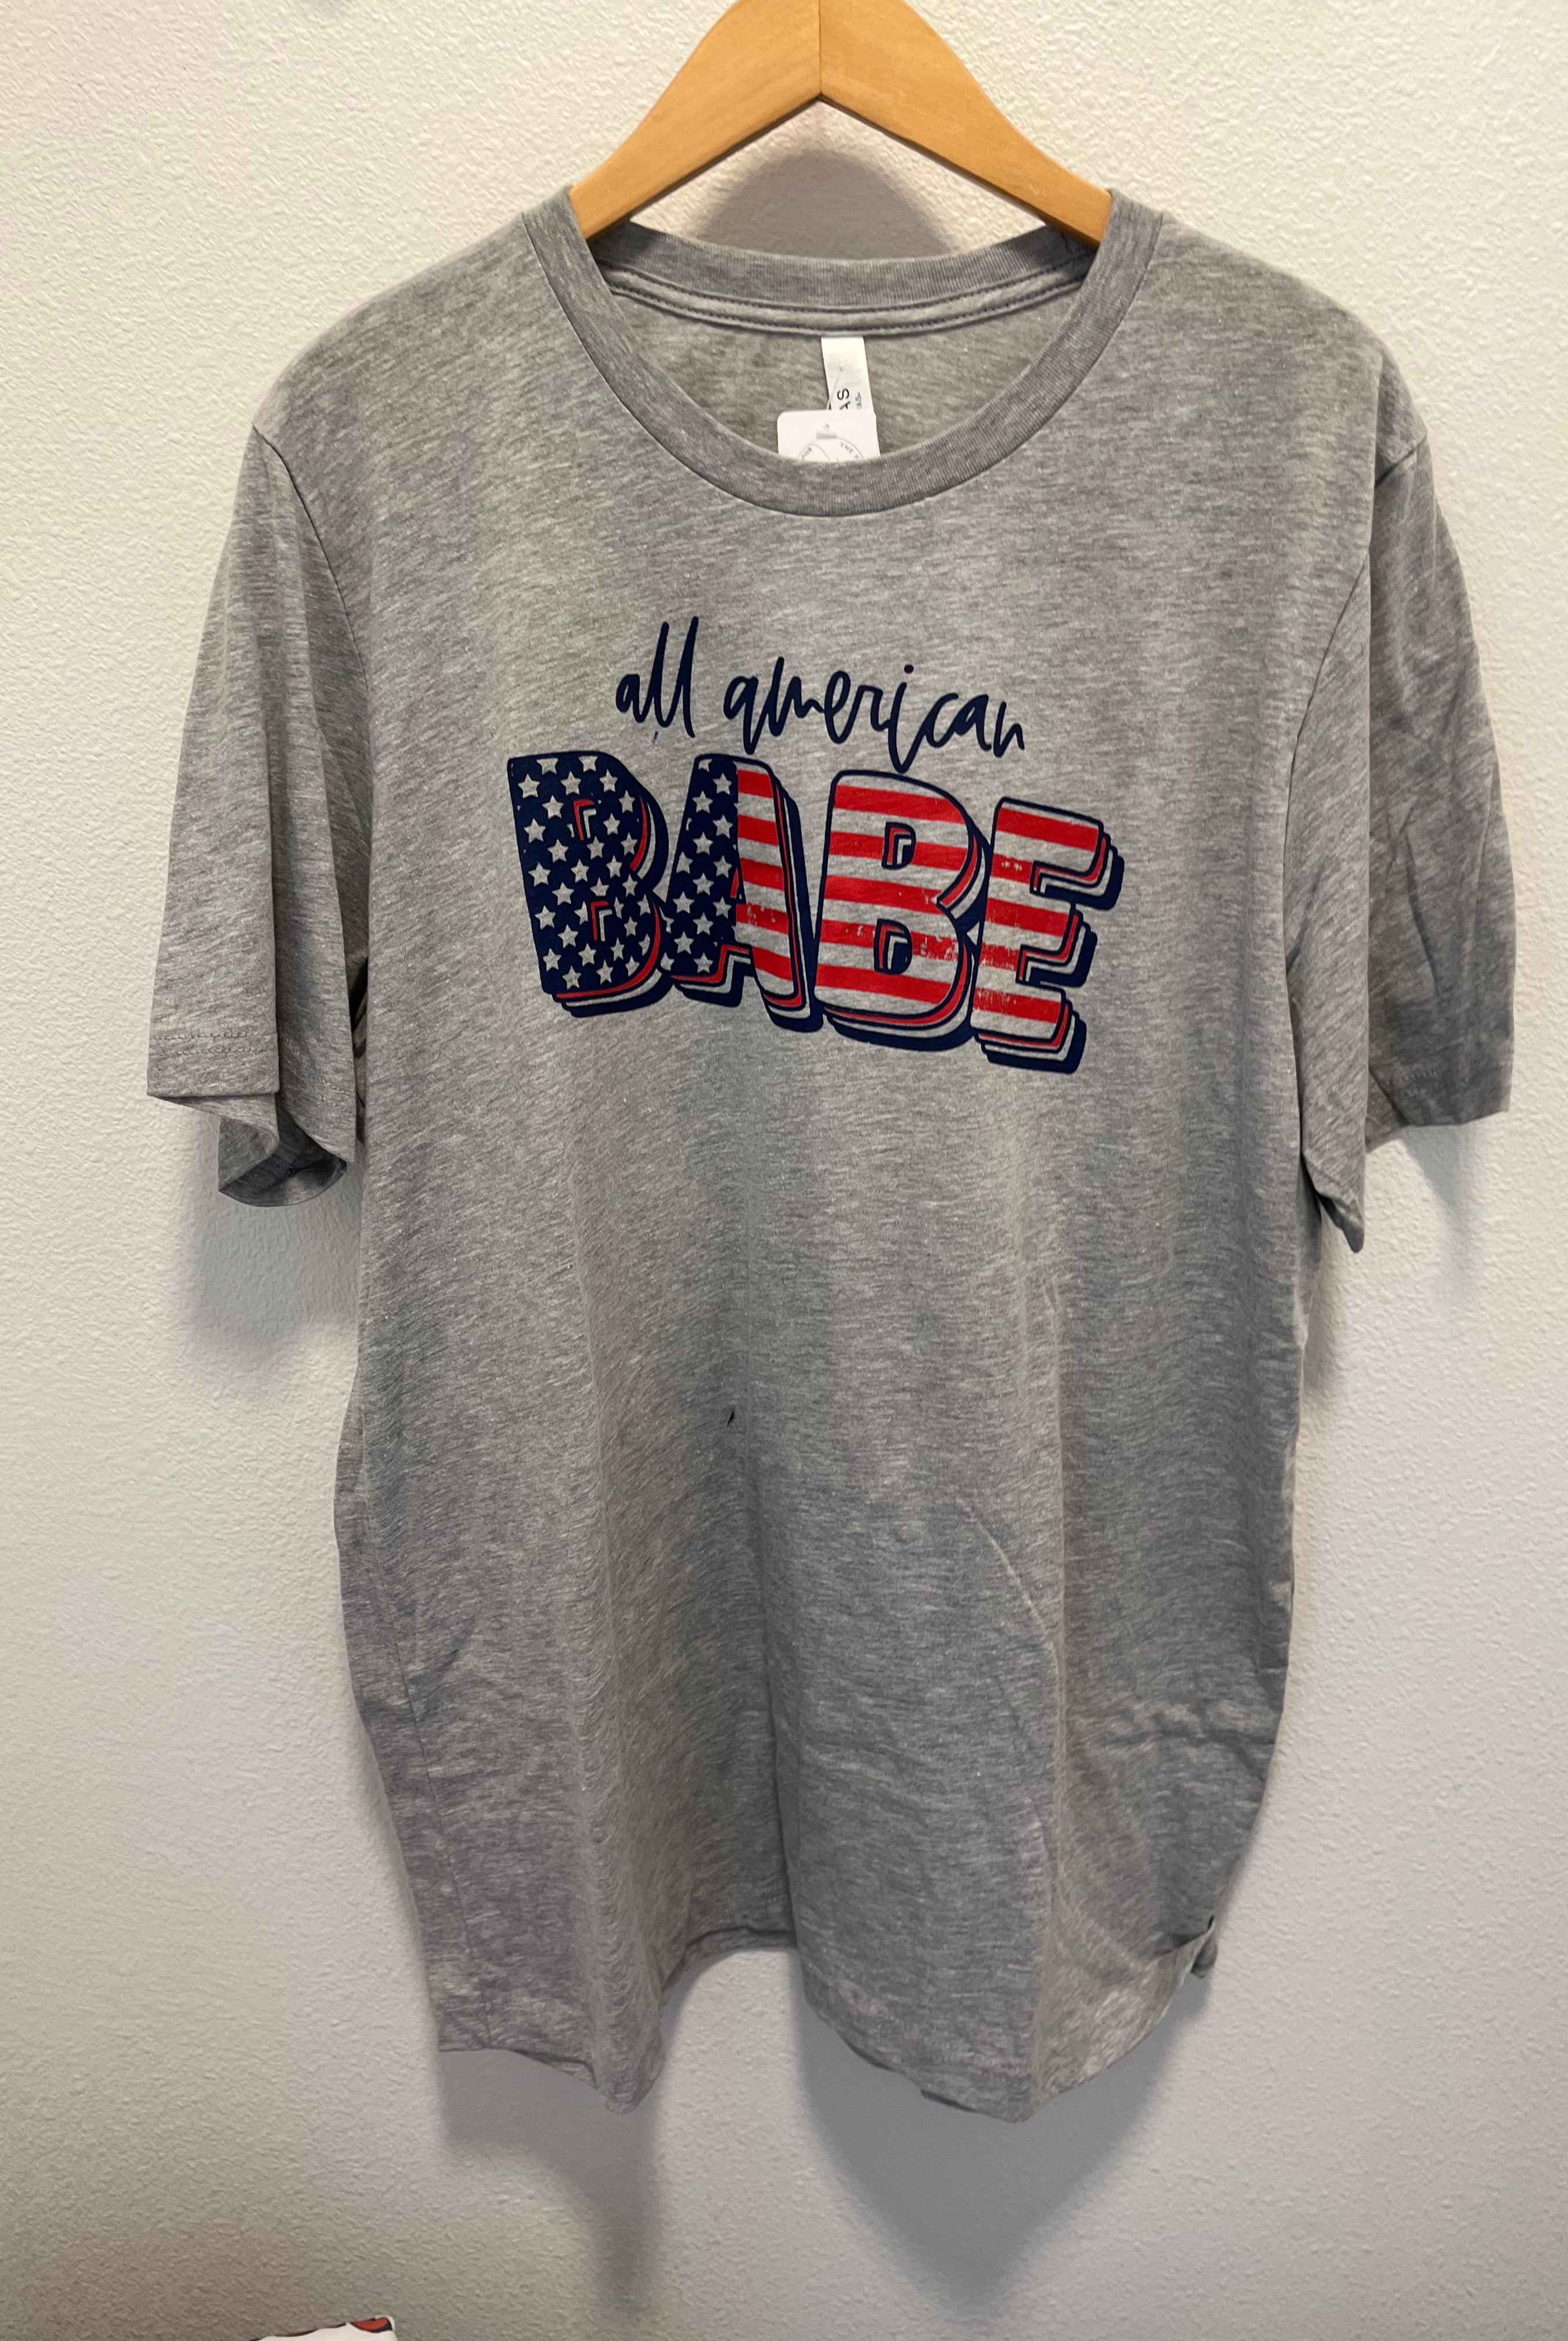 MN All American Babe Tee-Graphic Tee's-The Funky Zebra Ames-The Funky Zebra Ames, Women's Fashion Boutique in Ames, Iowa